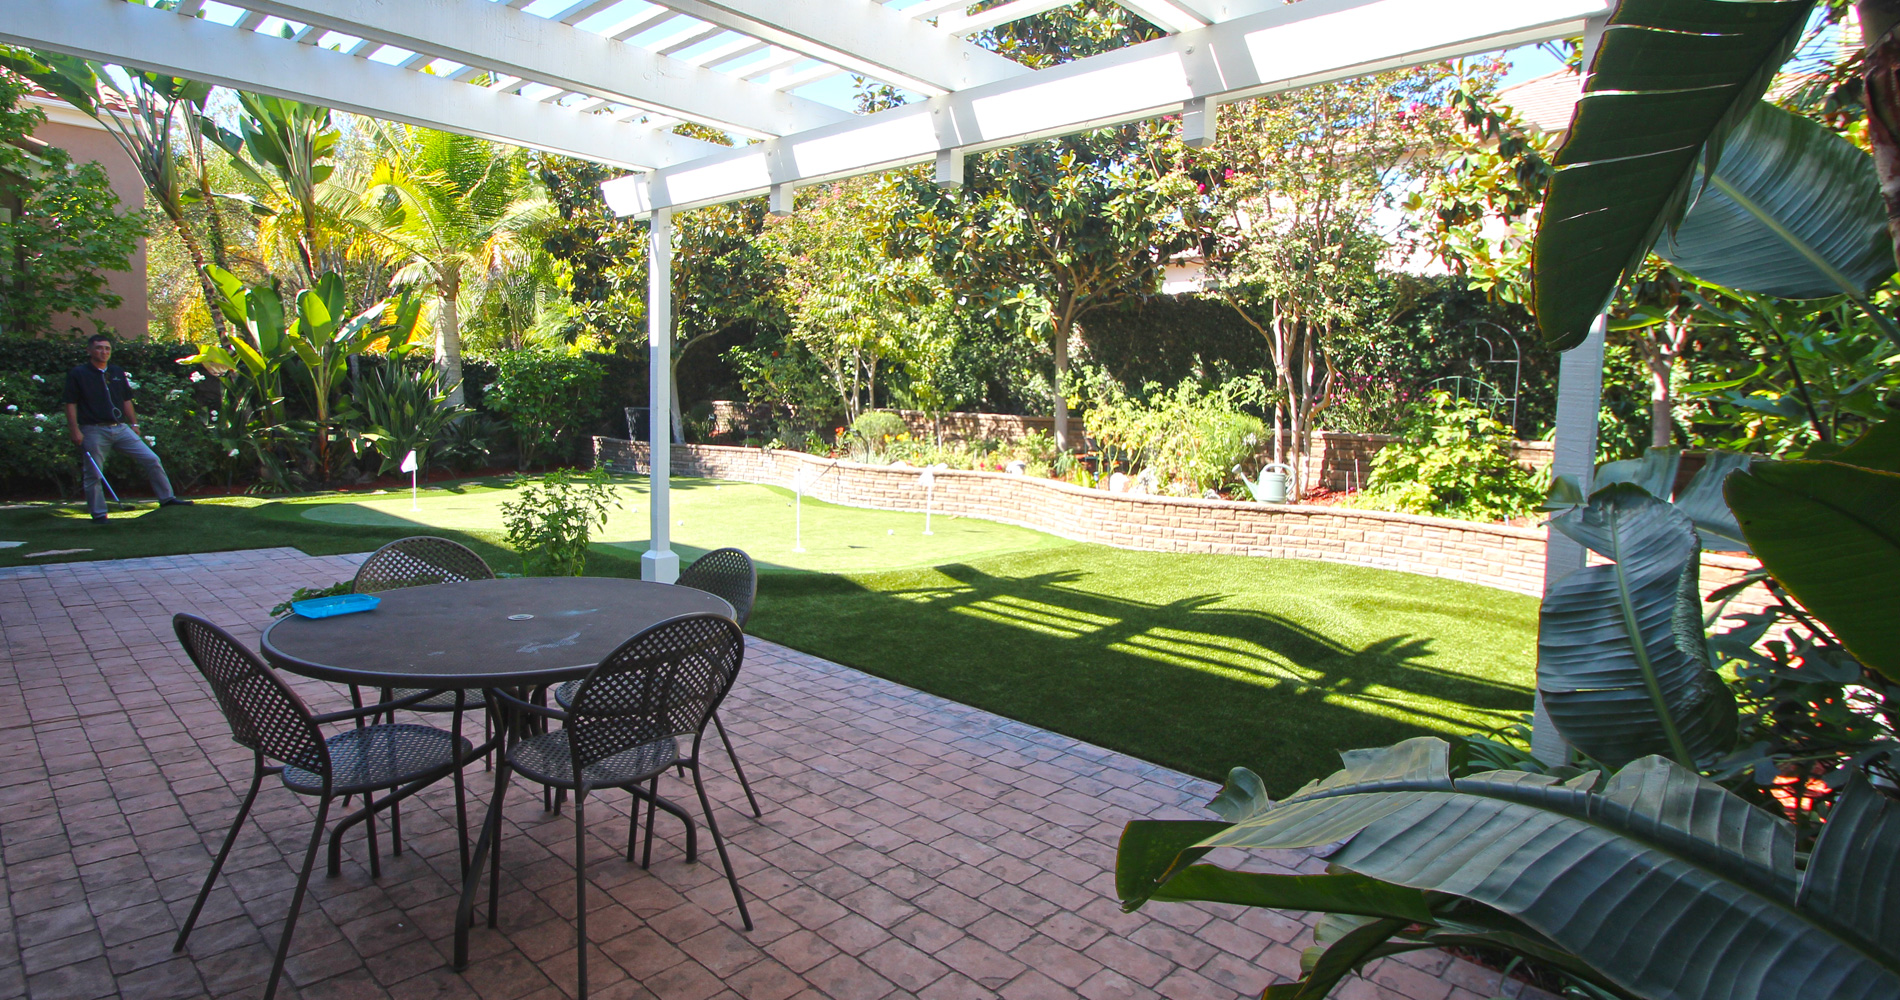 Can Wholesale Artificial Turf Save Me Money?